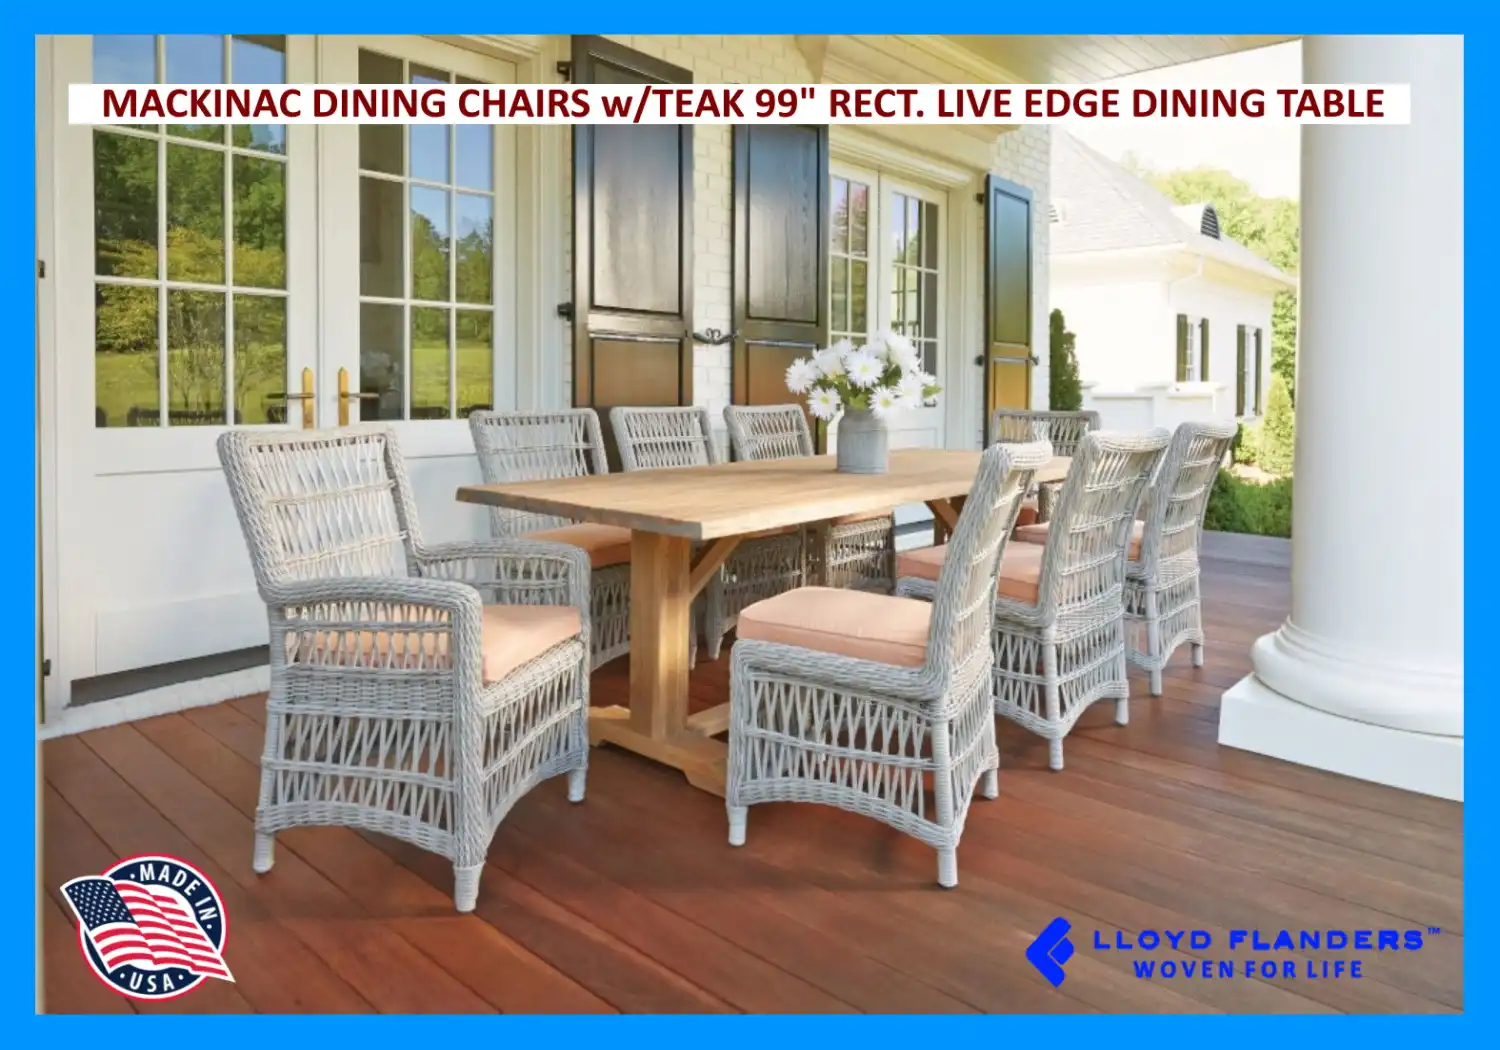 MACKINAC DINING CHAIRS WITH TEAK 99" RECTANGULAR LIVE EDGE DINING TABLE